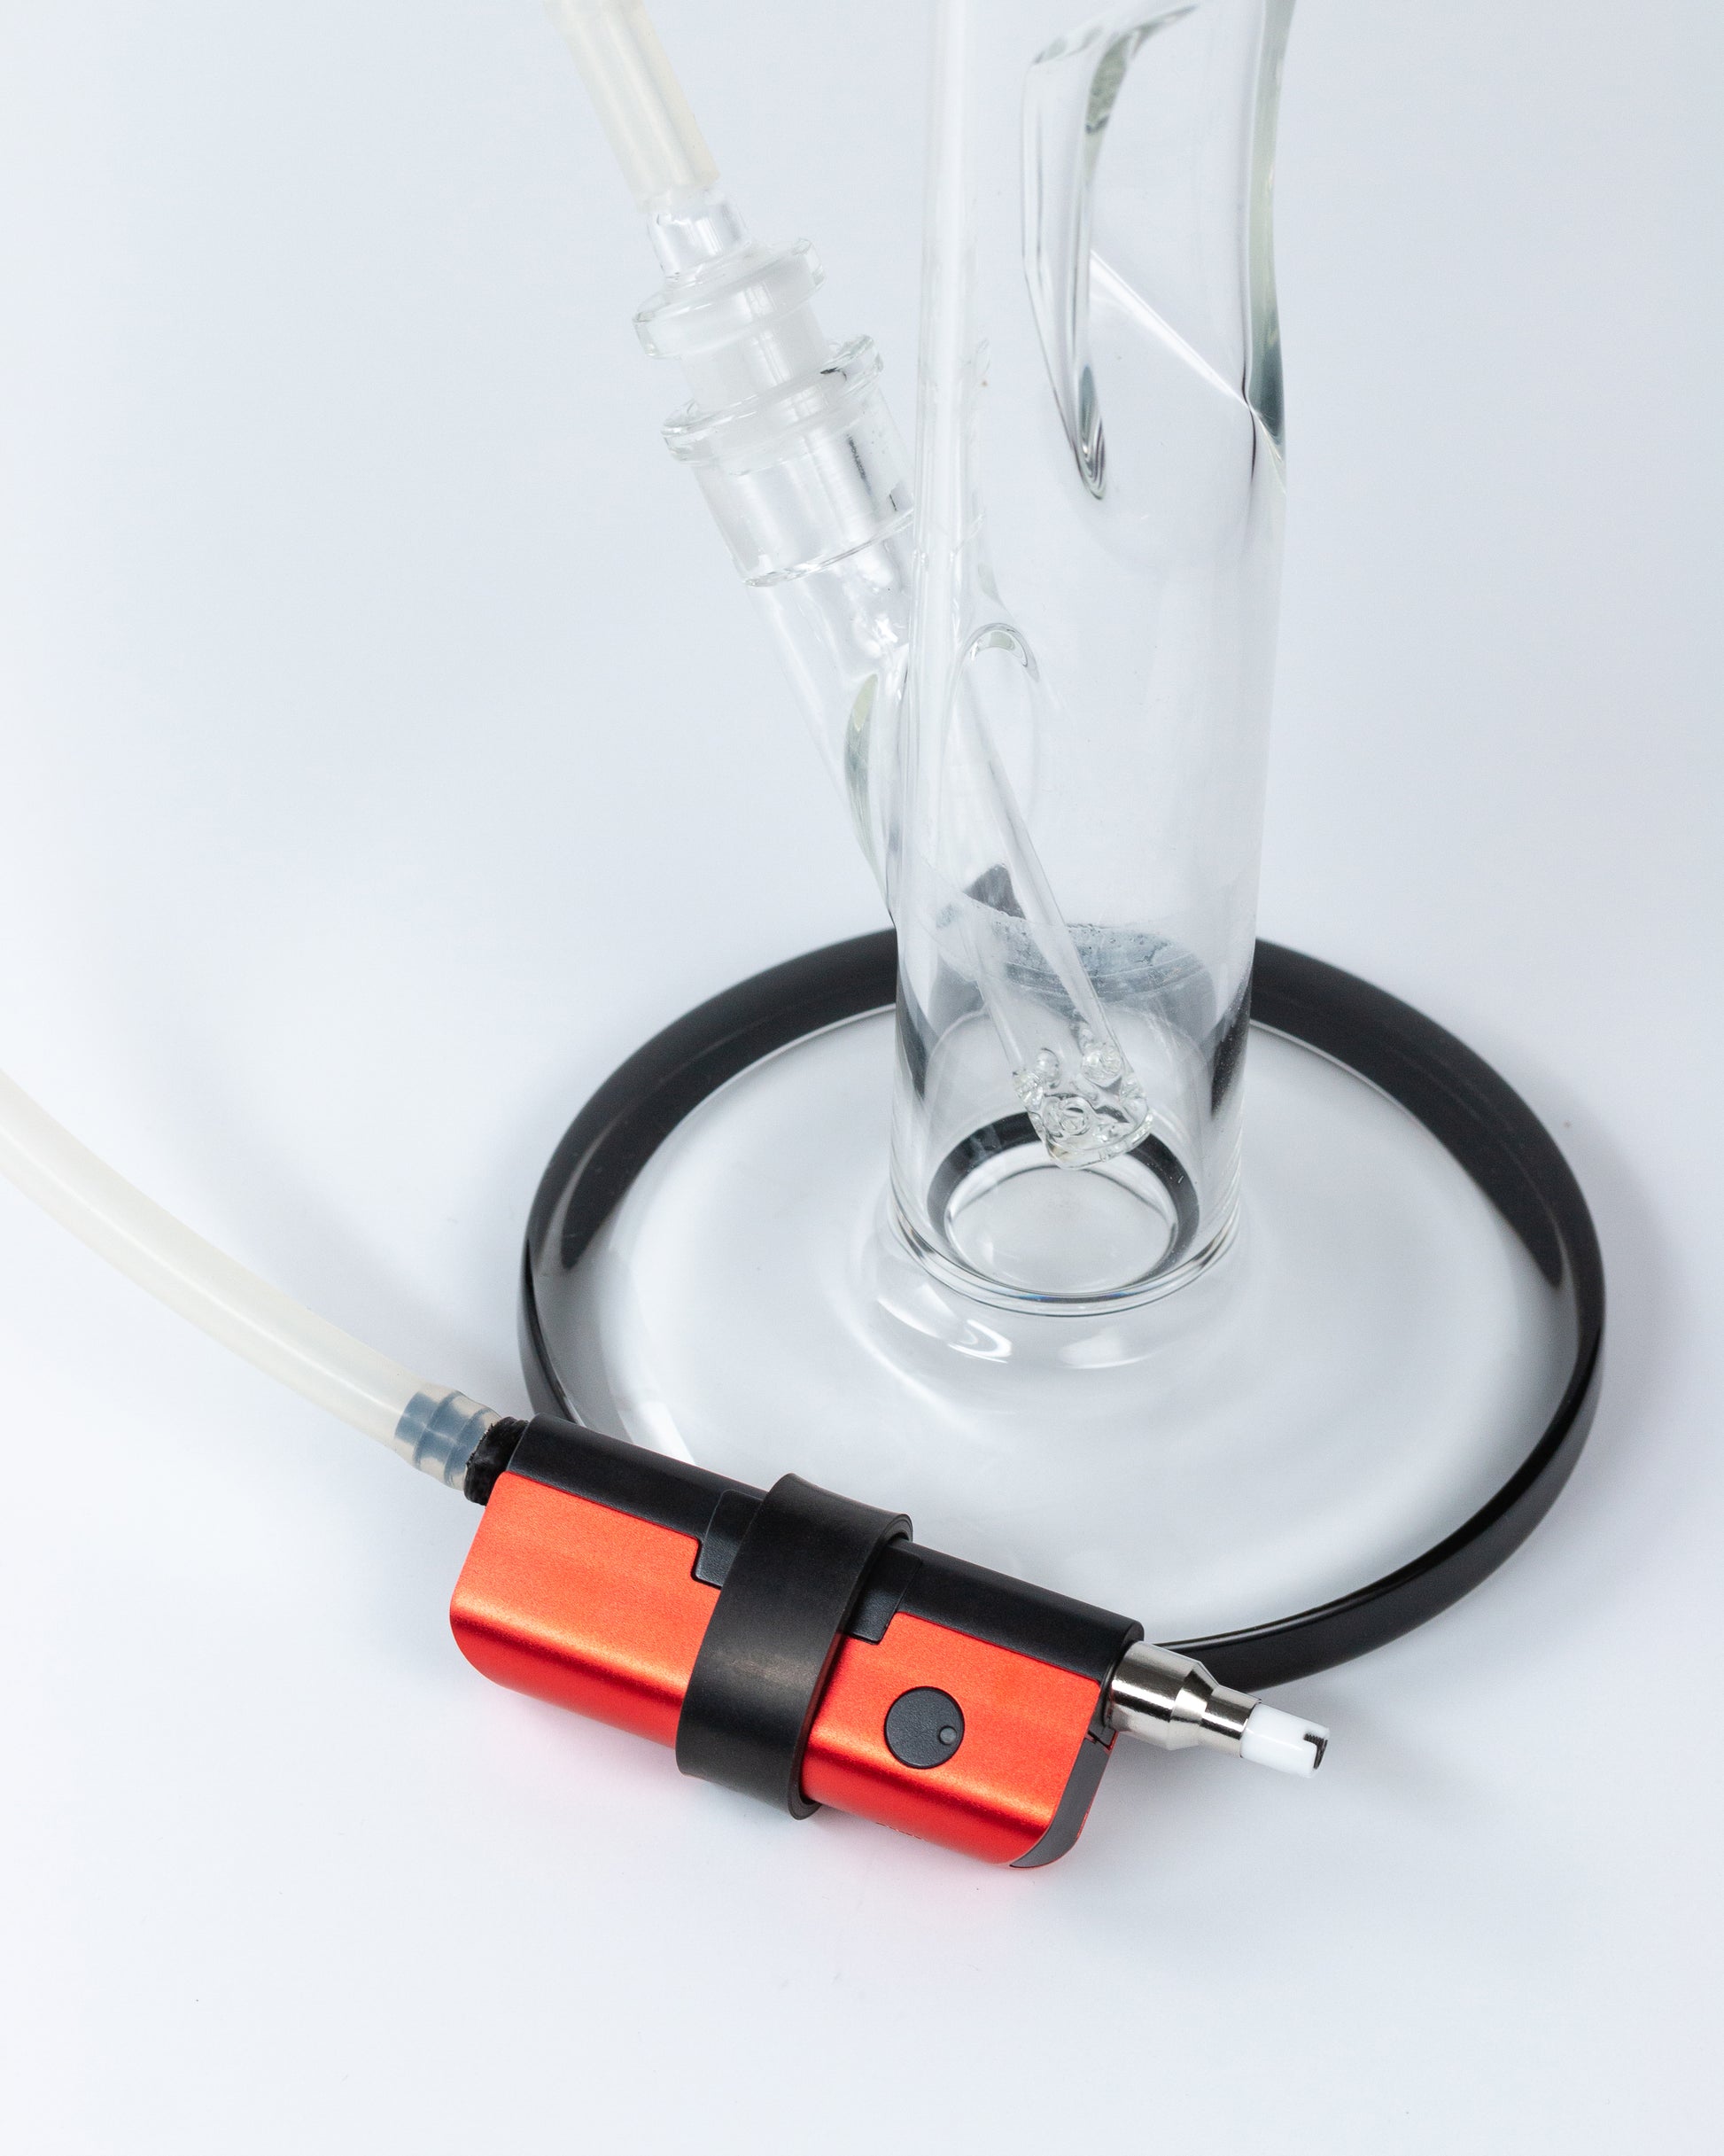 EVRI - GLASS ATTACHMENT with Female or Male Tip to combine electric vaping and dab rig water filtration without a torch